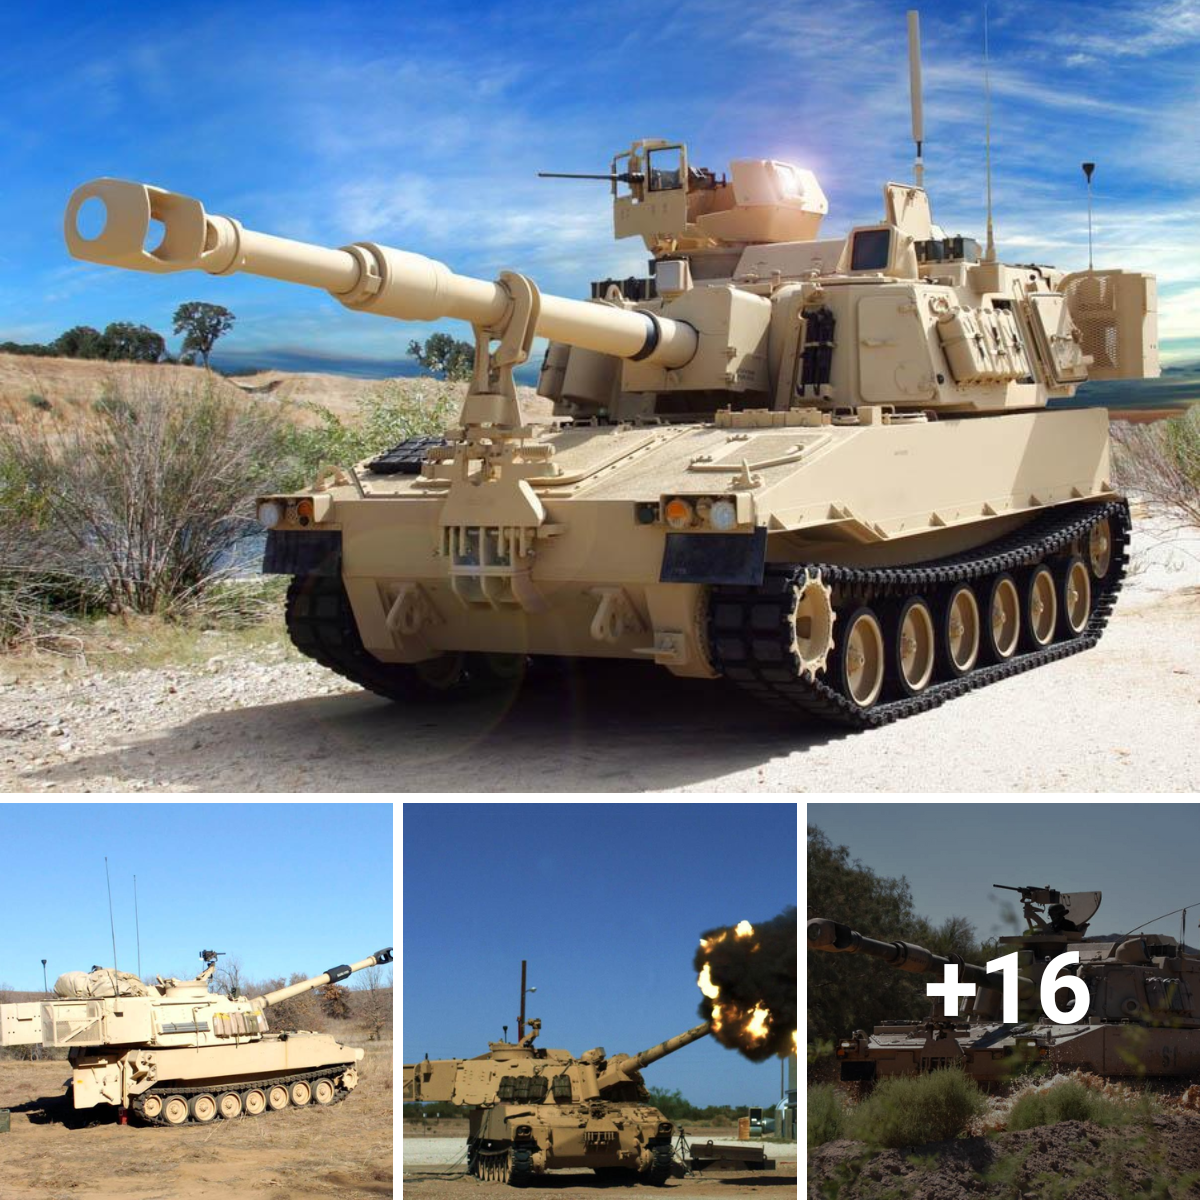 King of the battlefield M109 Paladin self-propelled artillery is the cornerstone of US military artillery capabilities.